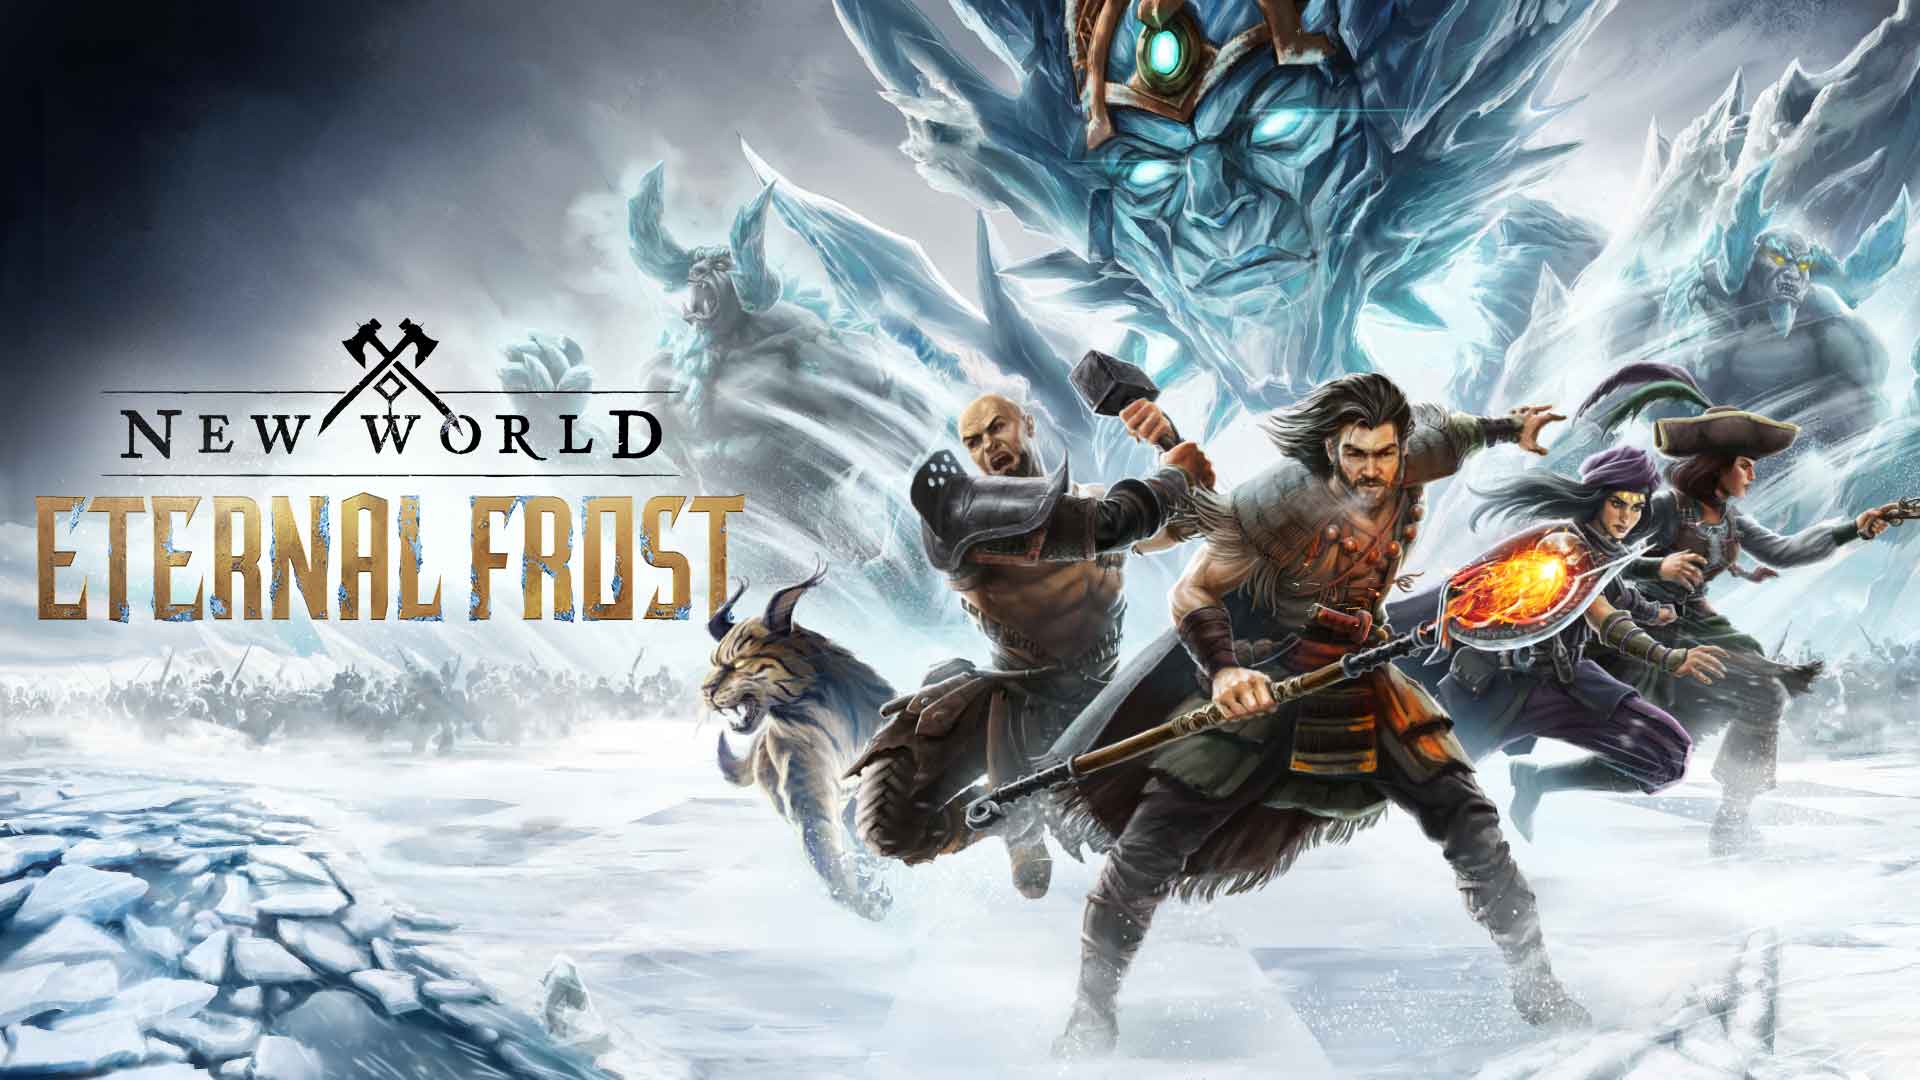 Eternal Frost - News  New World - Open World MMO PC Game